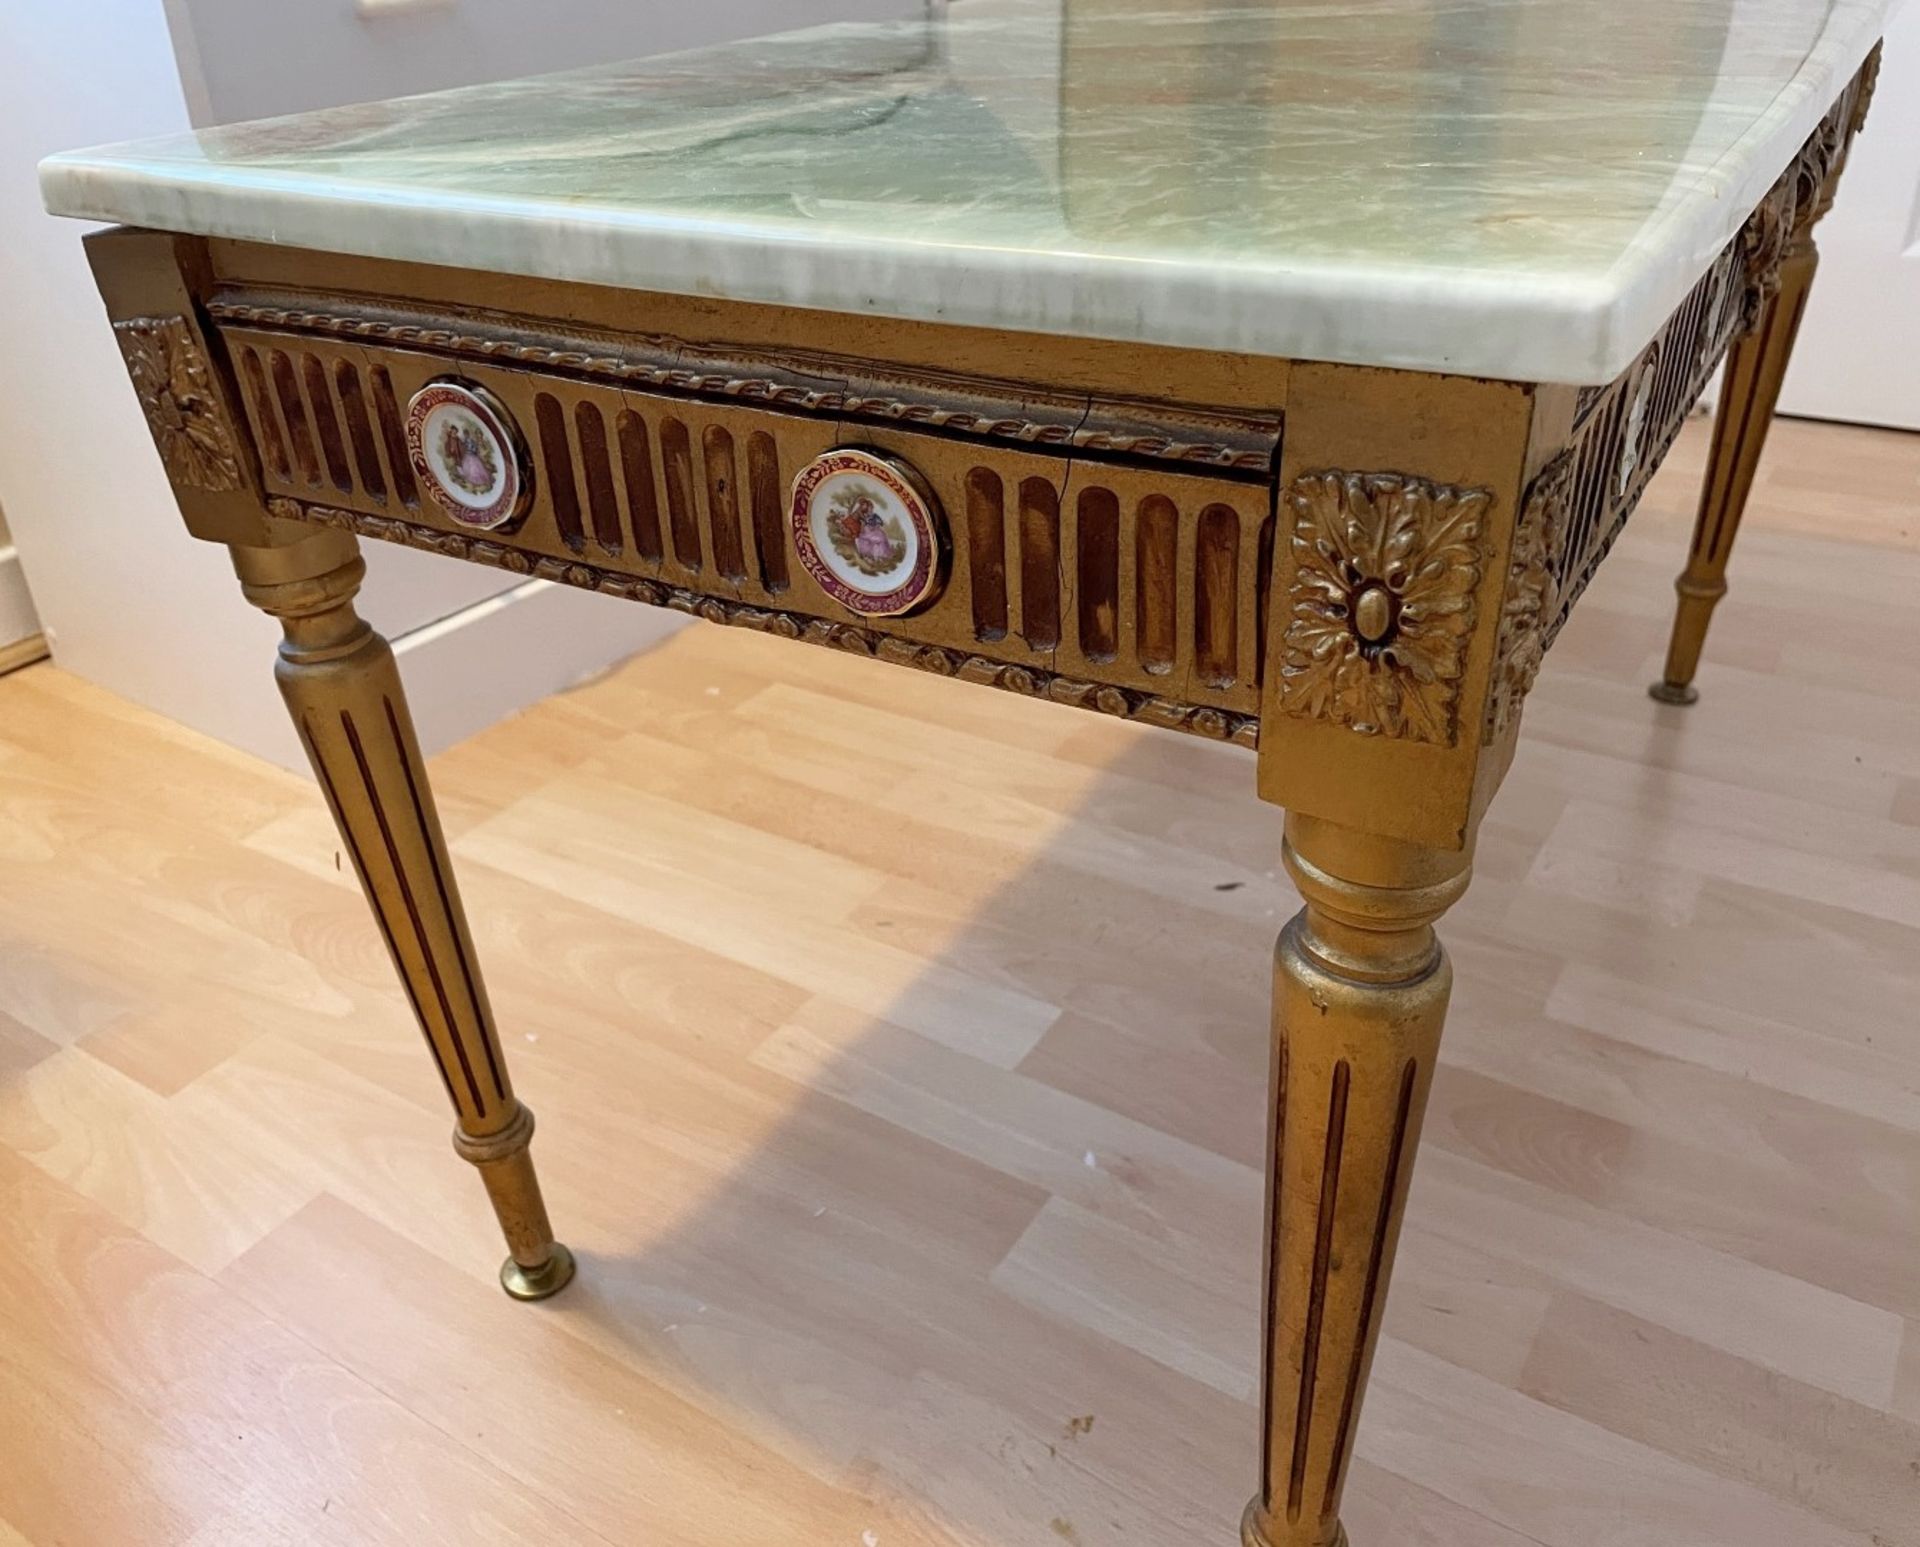 1 x Rectangular Period-style Marble Topped Table - From An Exclusive Property In Leeds - No VAT on - Image 3 of 5